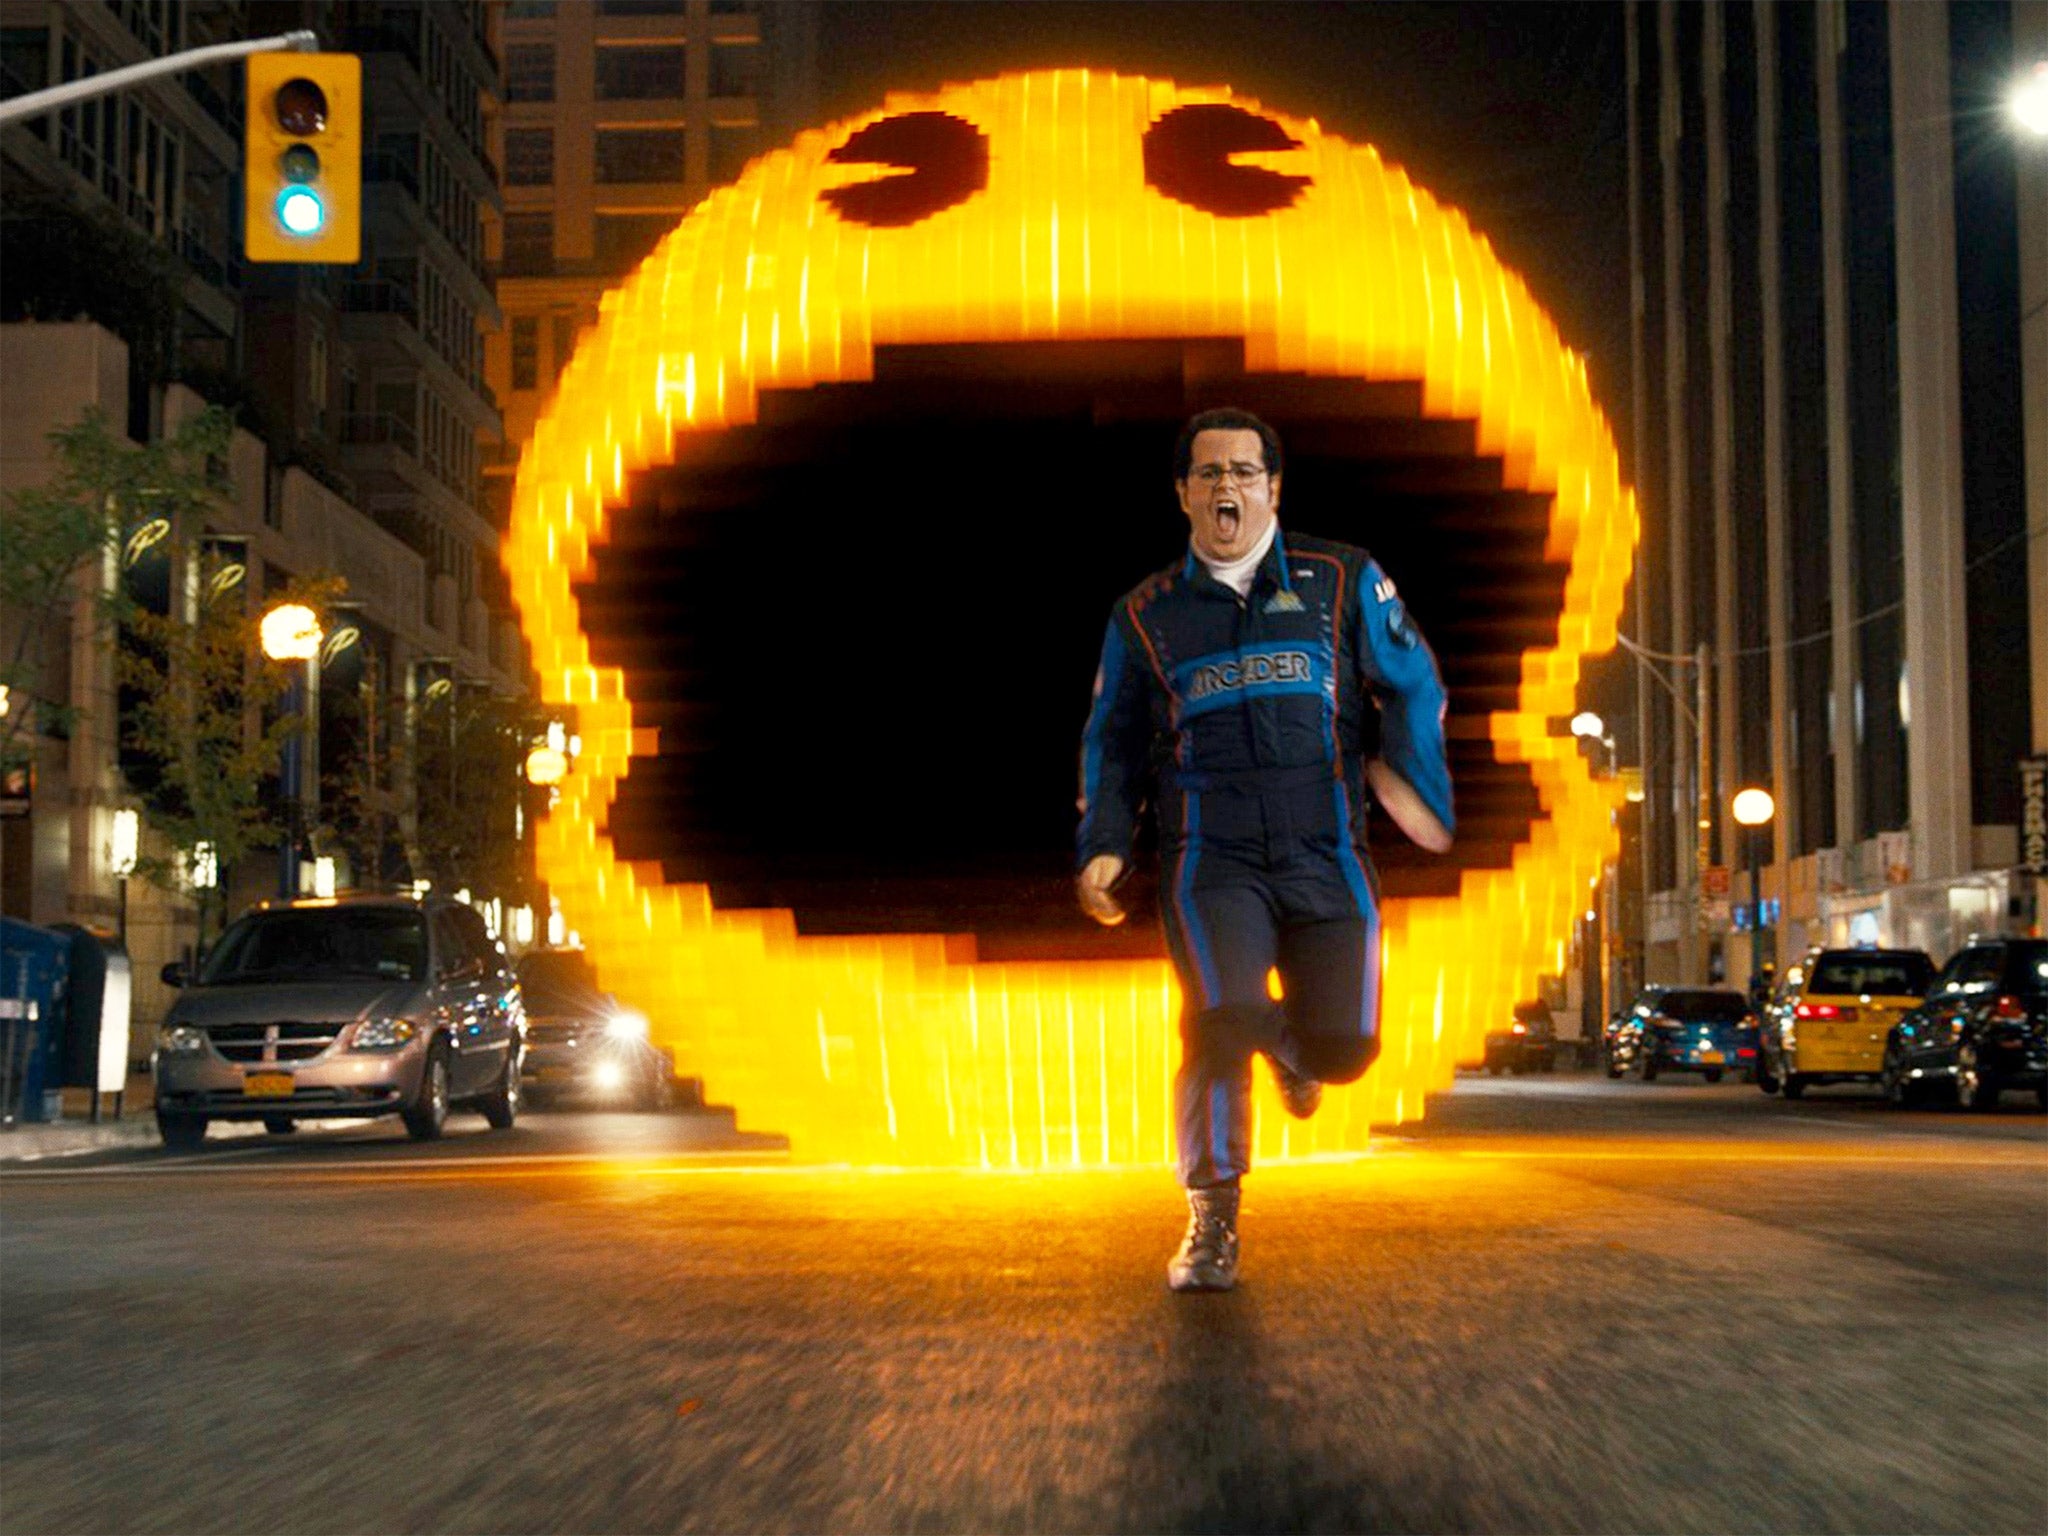 ‘Pixels’ is about an alien invasion prompted by a misinterpretation of ‘Pac-Man’ and other games as a declaration of war